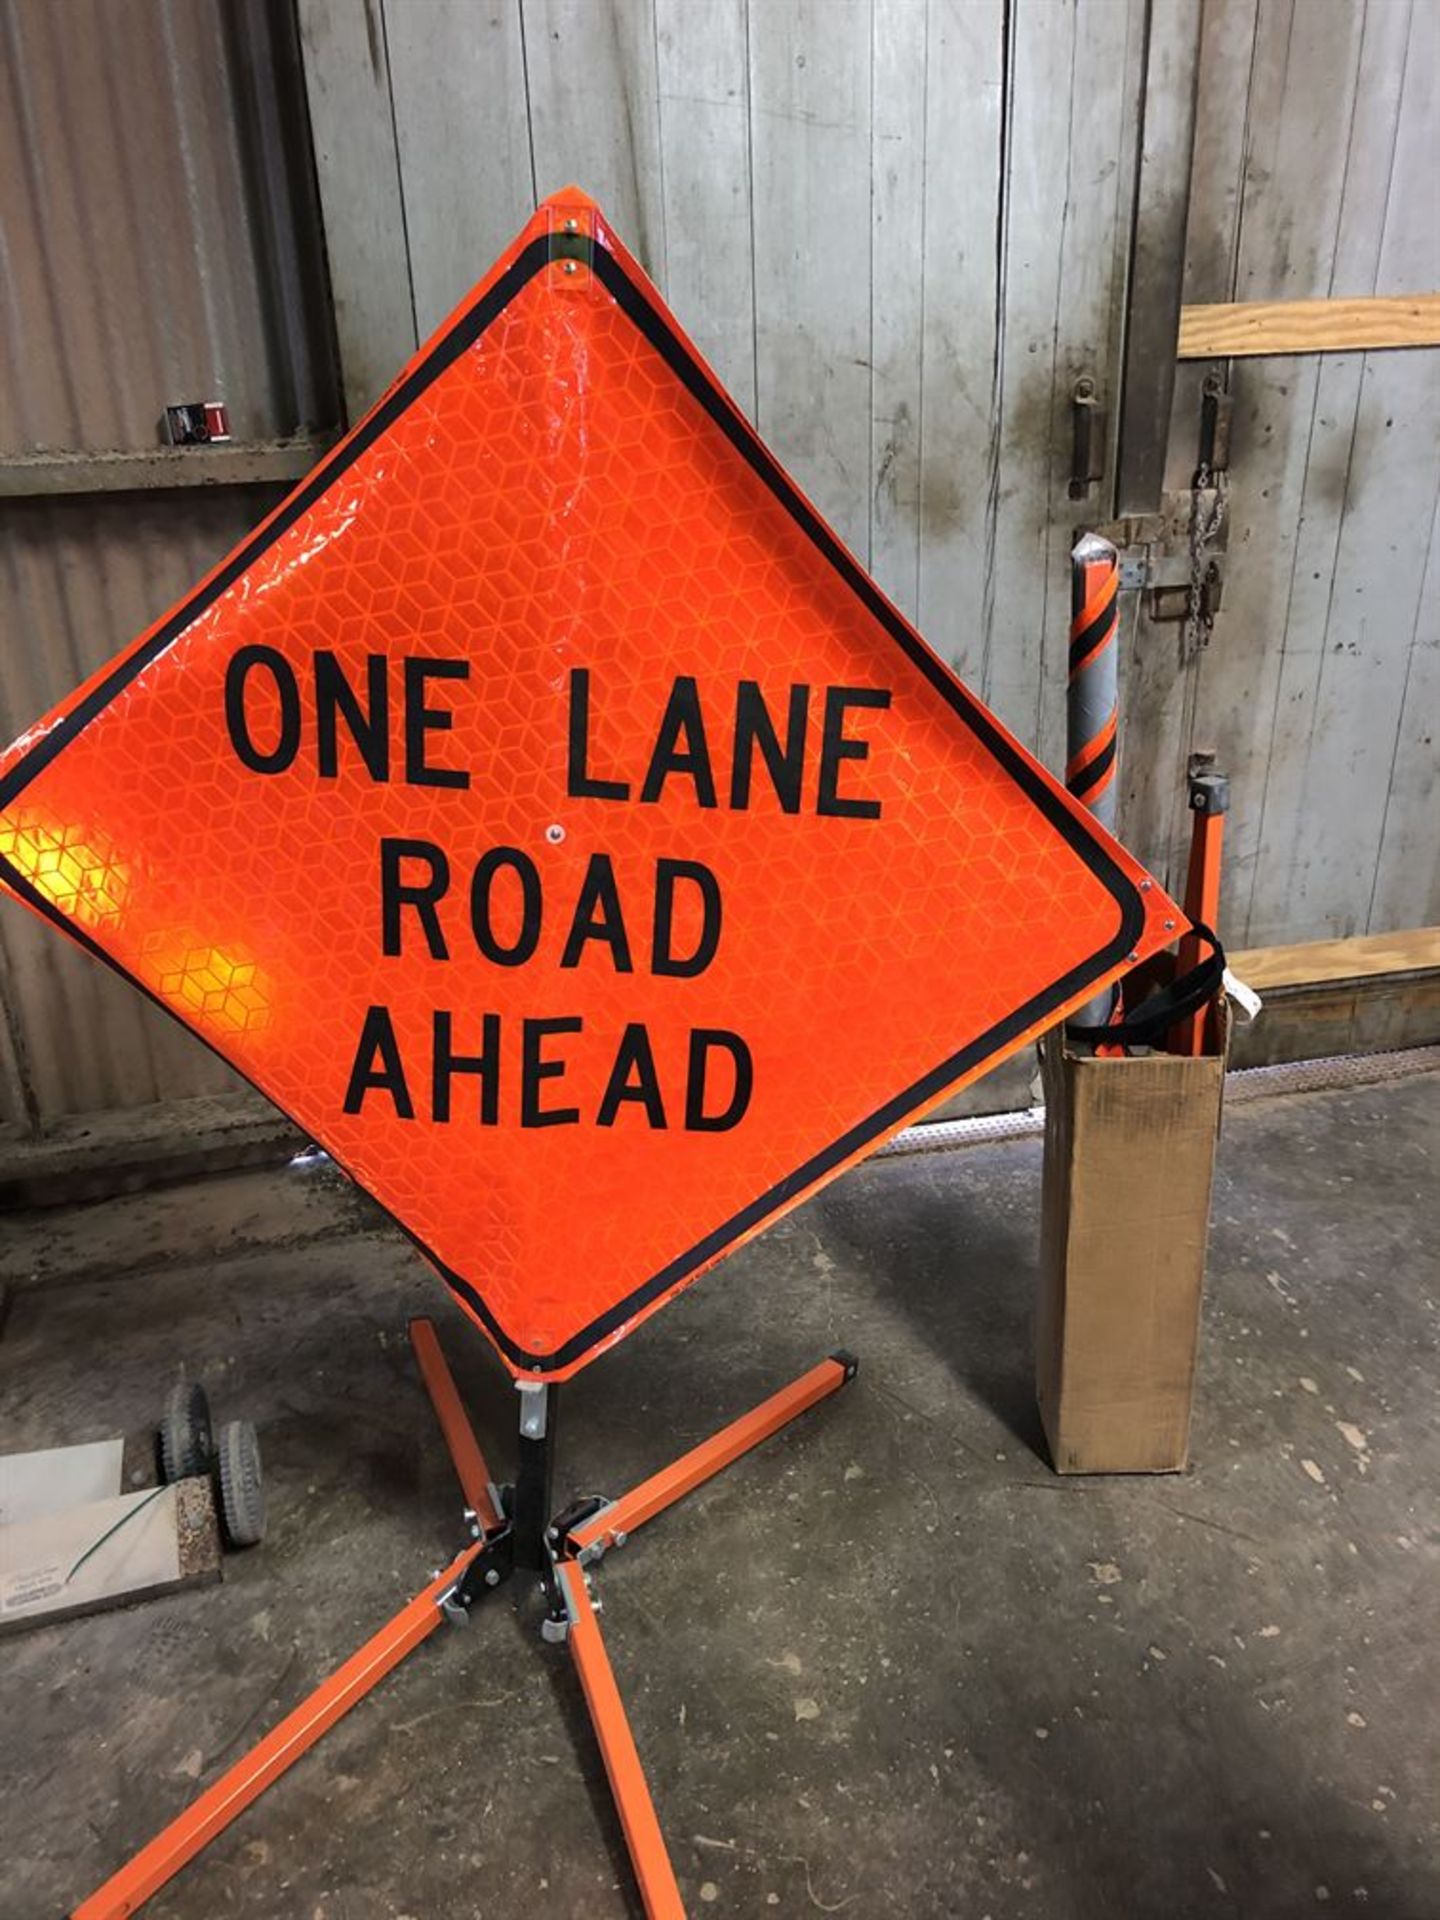 Lot Comprising of (2) "ONE LANE ROAD AHEAD" Safety Signs (Location: Wood Working Shop) - Image 2 of 2